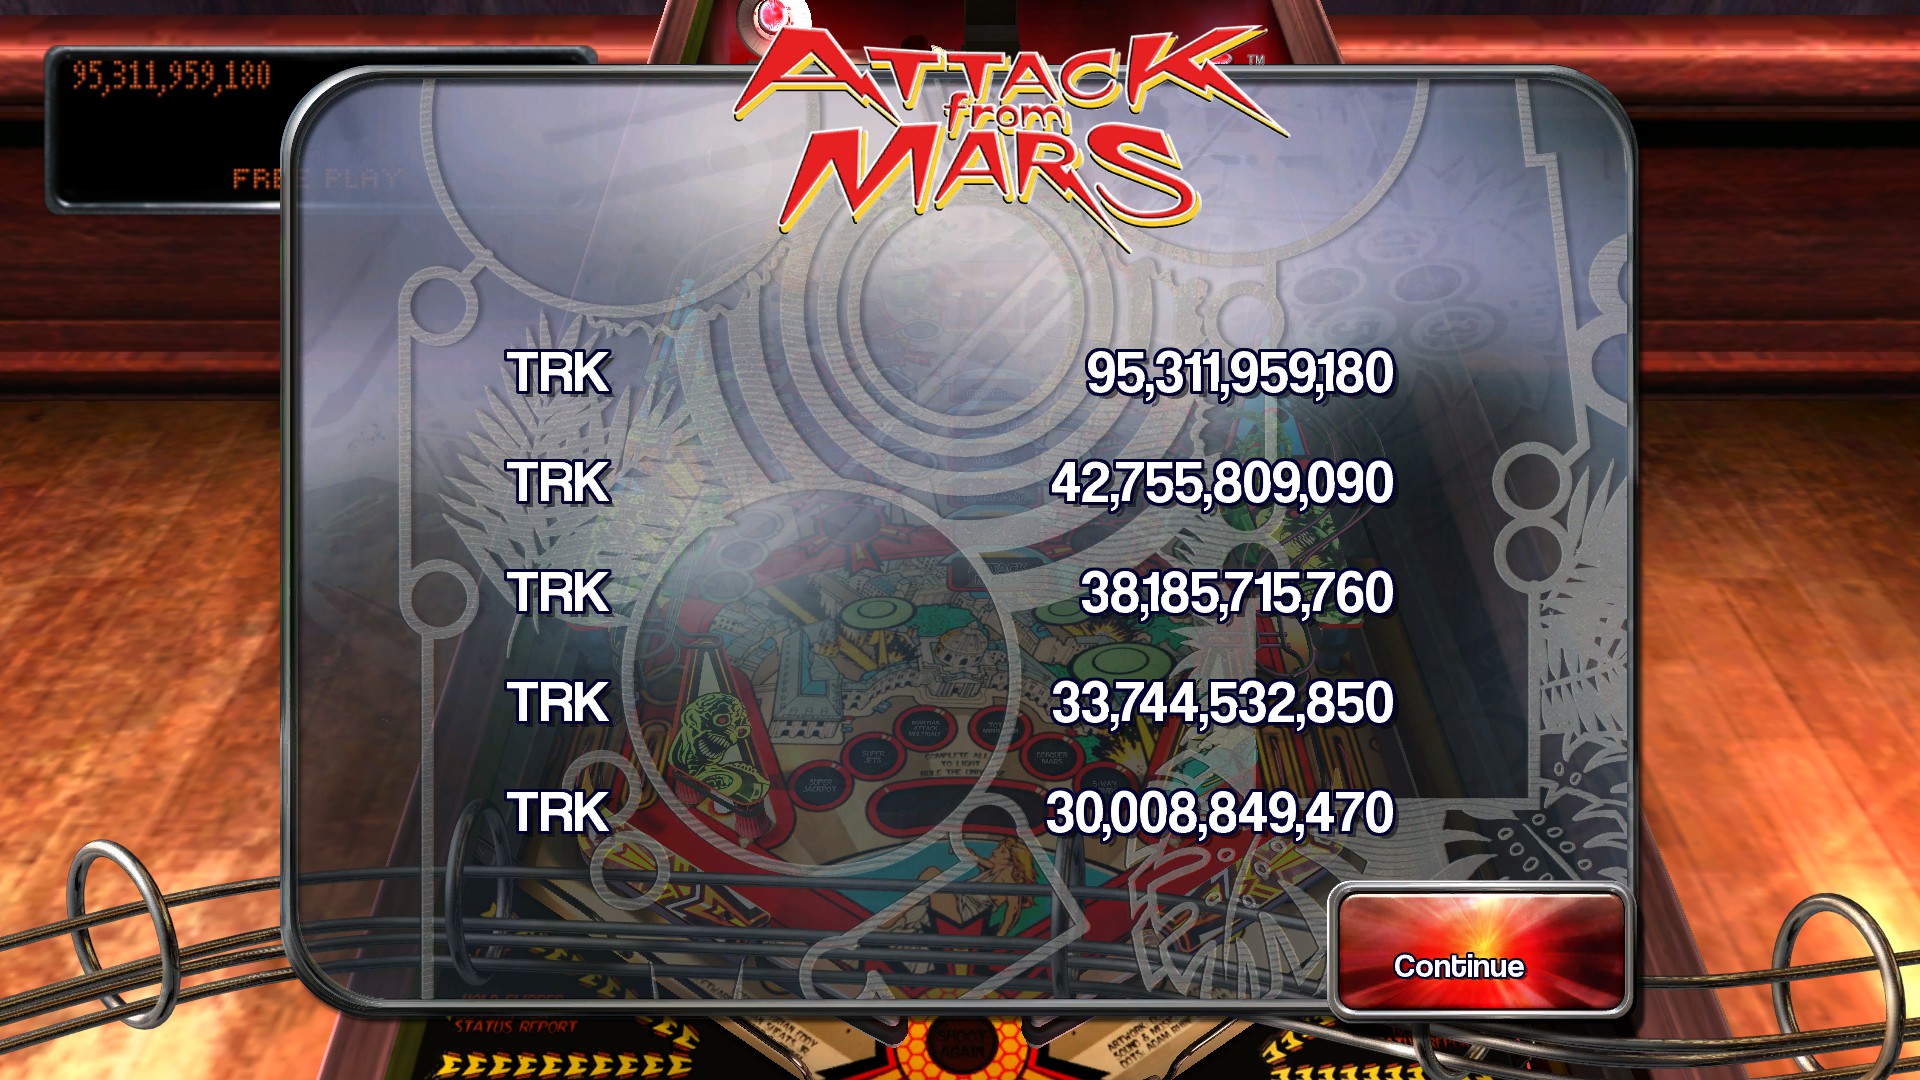 TheTrickster: Pinball Arcade: Attack From Mars (PC) 95,311,959,180 points on 2015-11-22 14:42:42